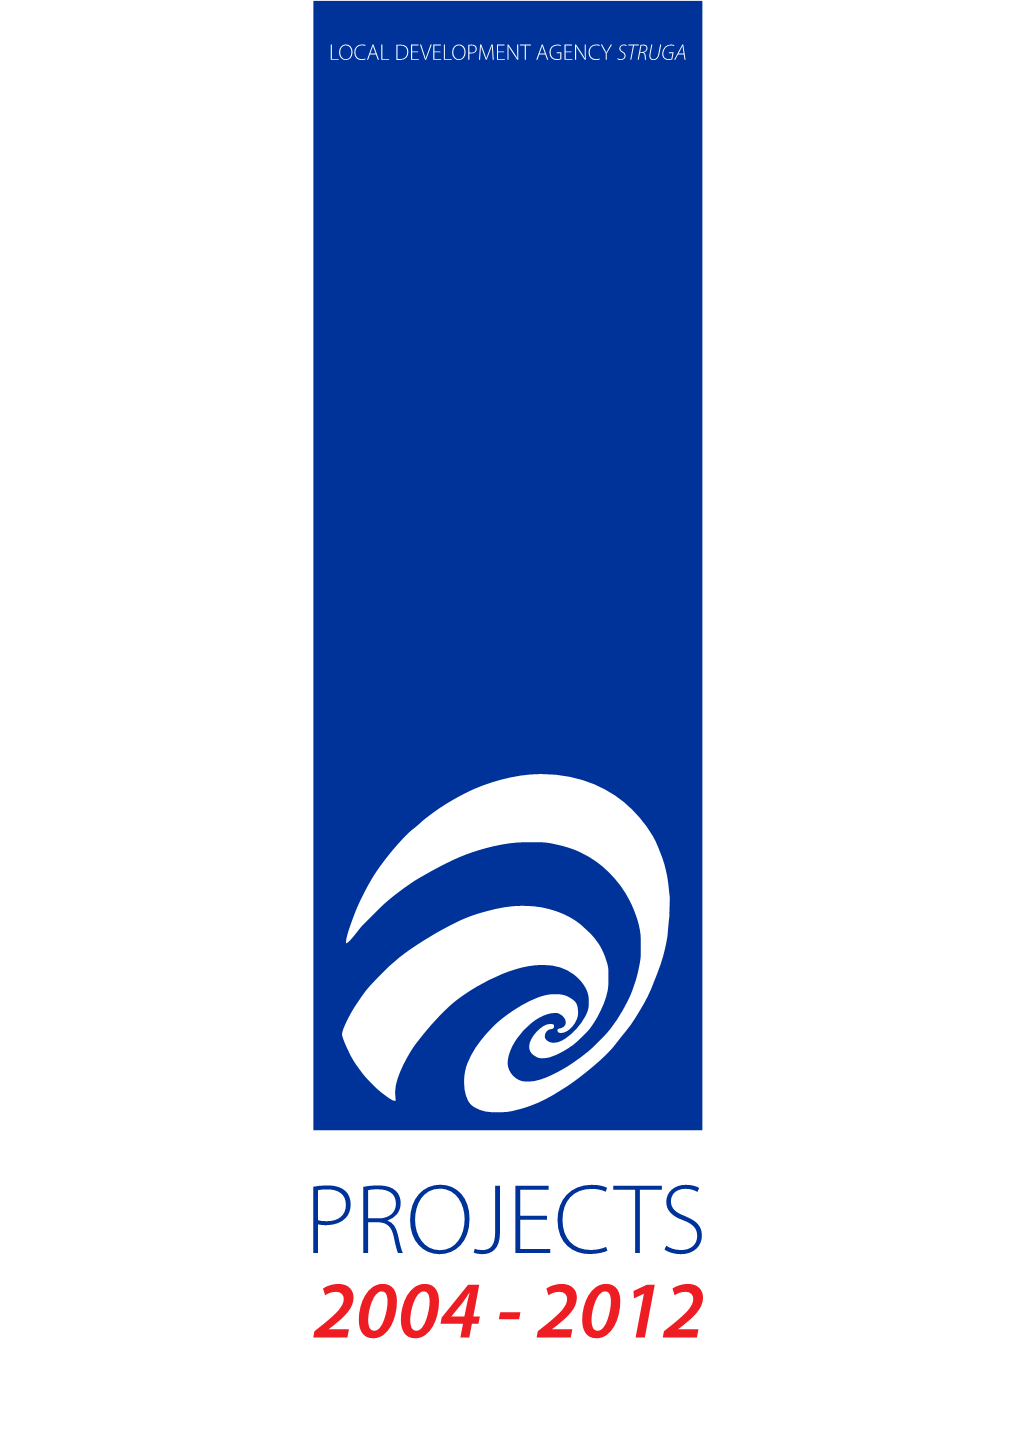 Projects 2004 - 2012